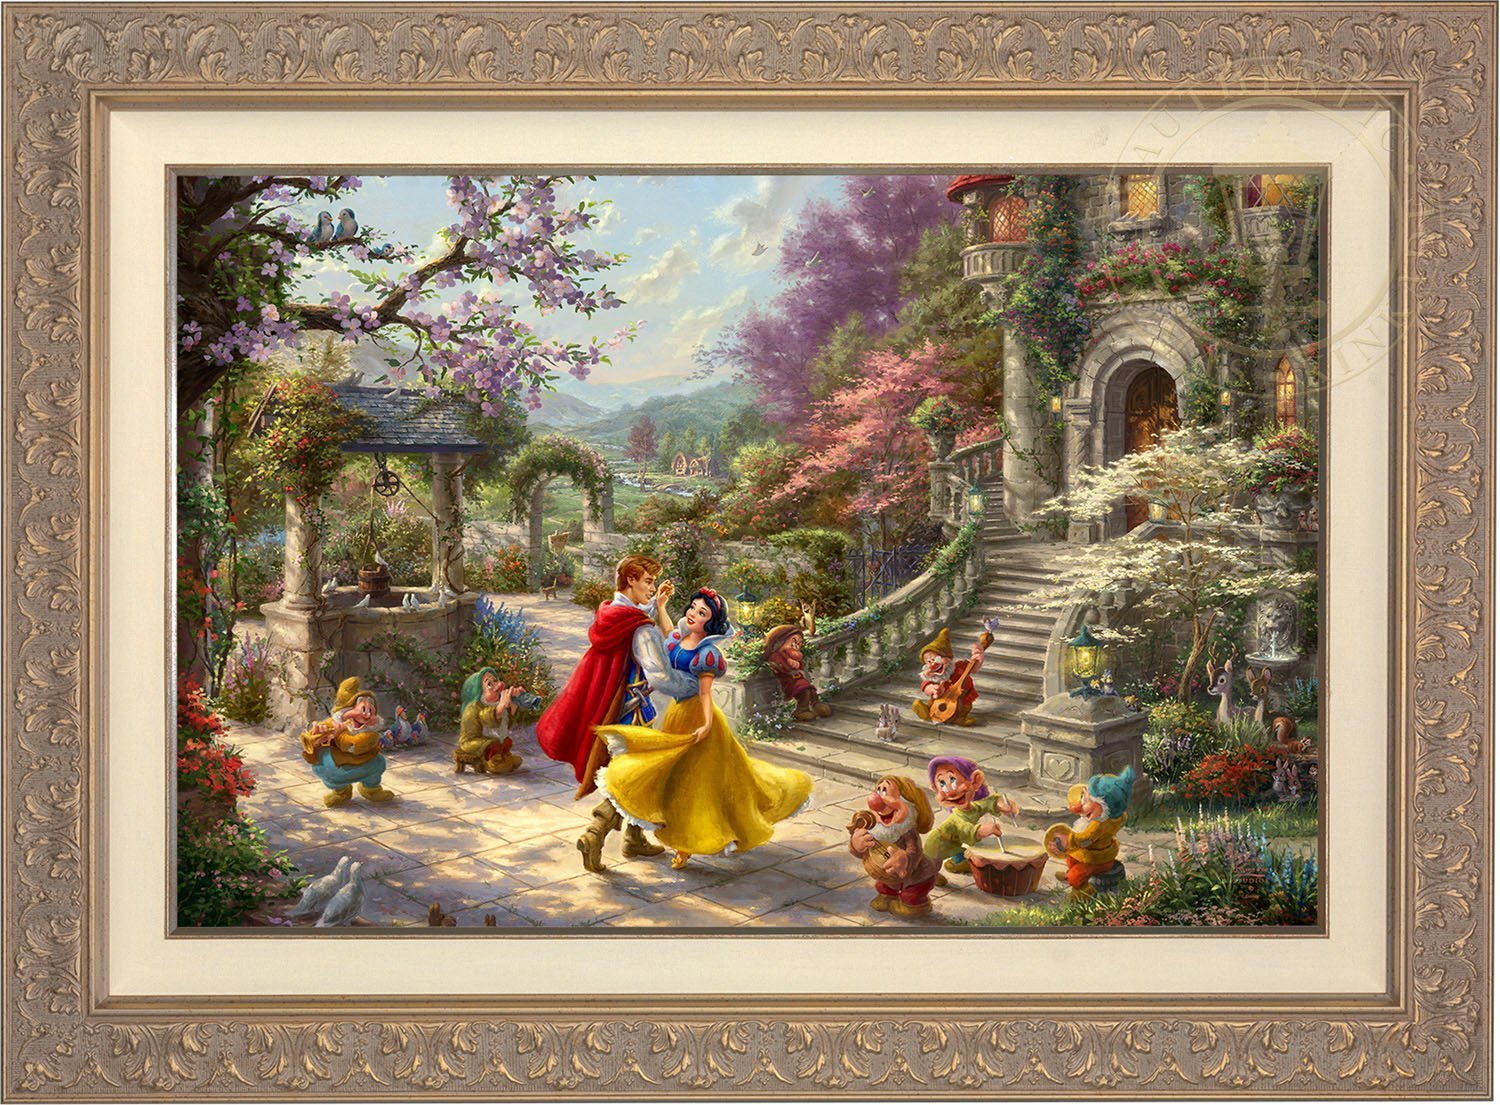 Snow White and the Prince dancing in the courtyard, accompanied by the Seven Dwarfs - Carrisa Frame